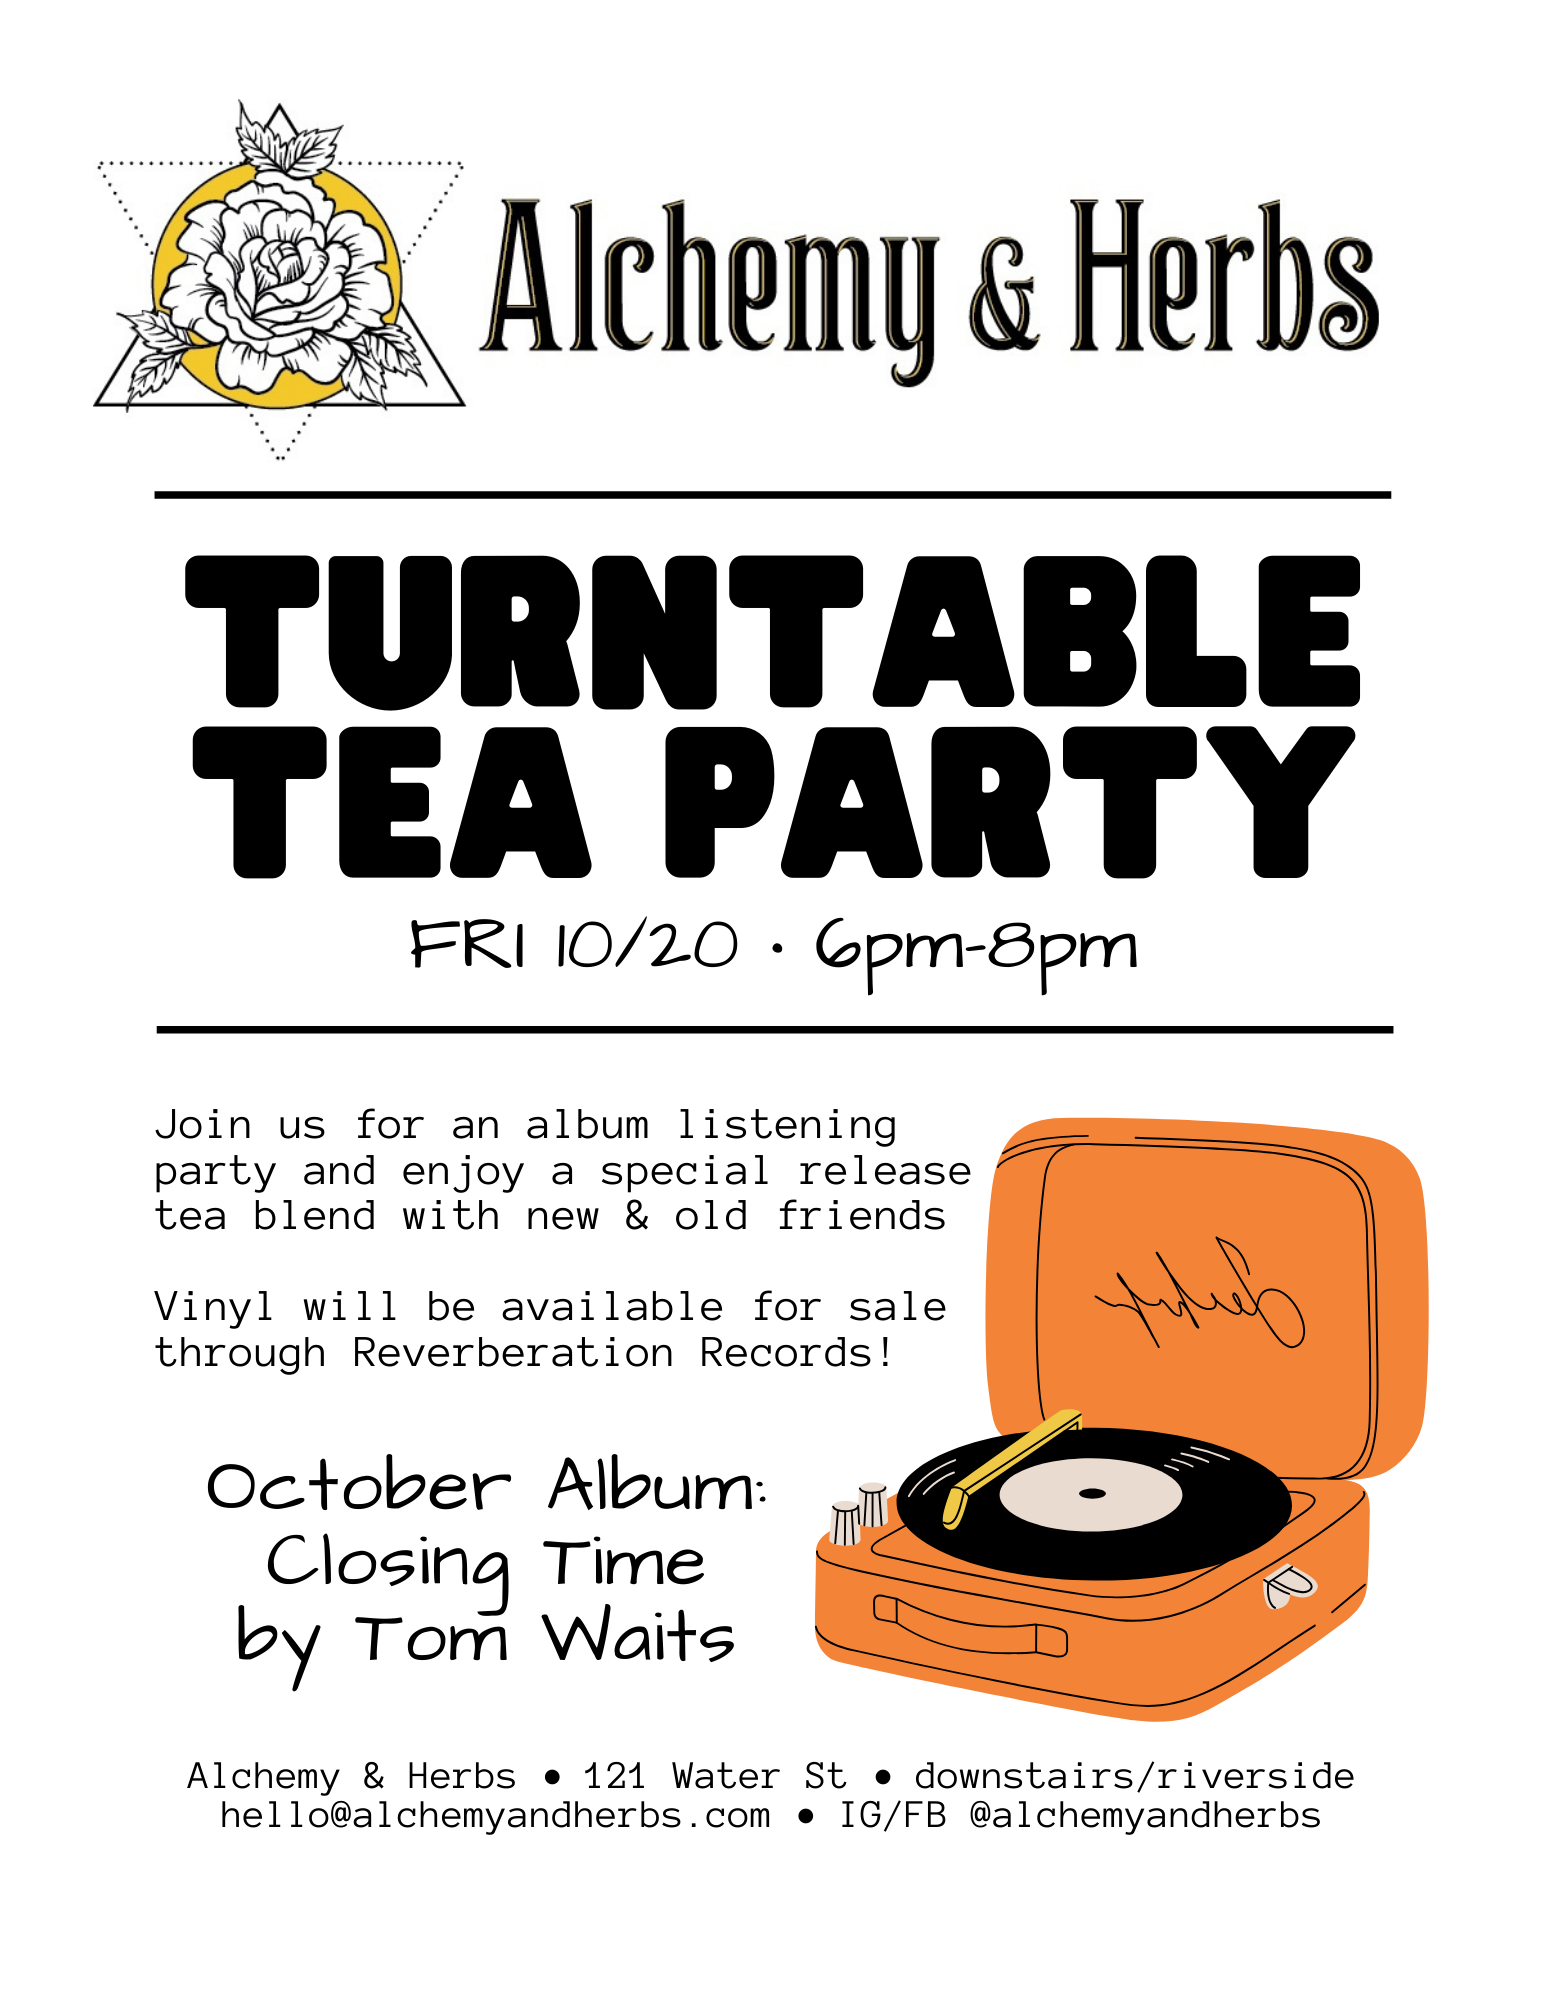 Turntable Tea Party!